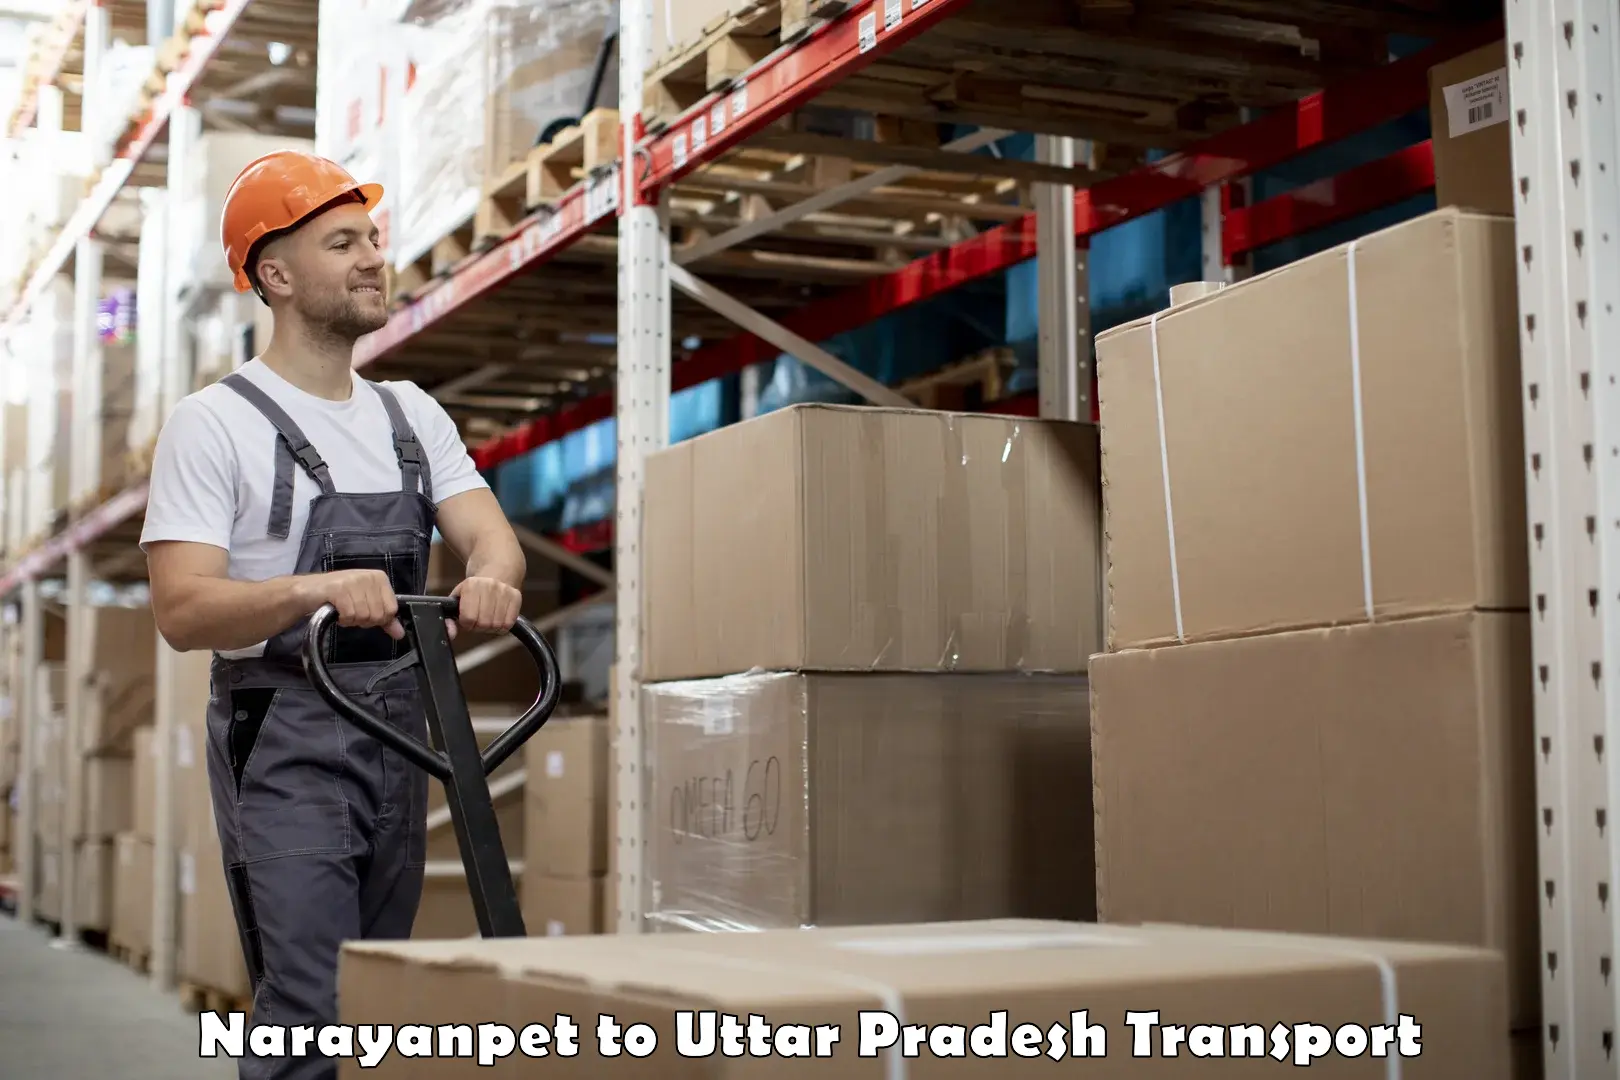 Delivery service Narayanpet to Sahaswan